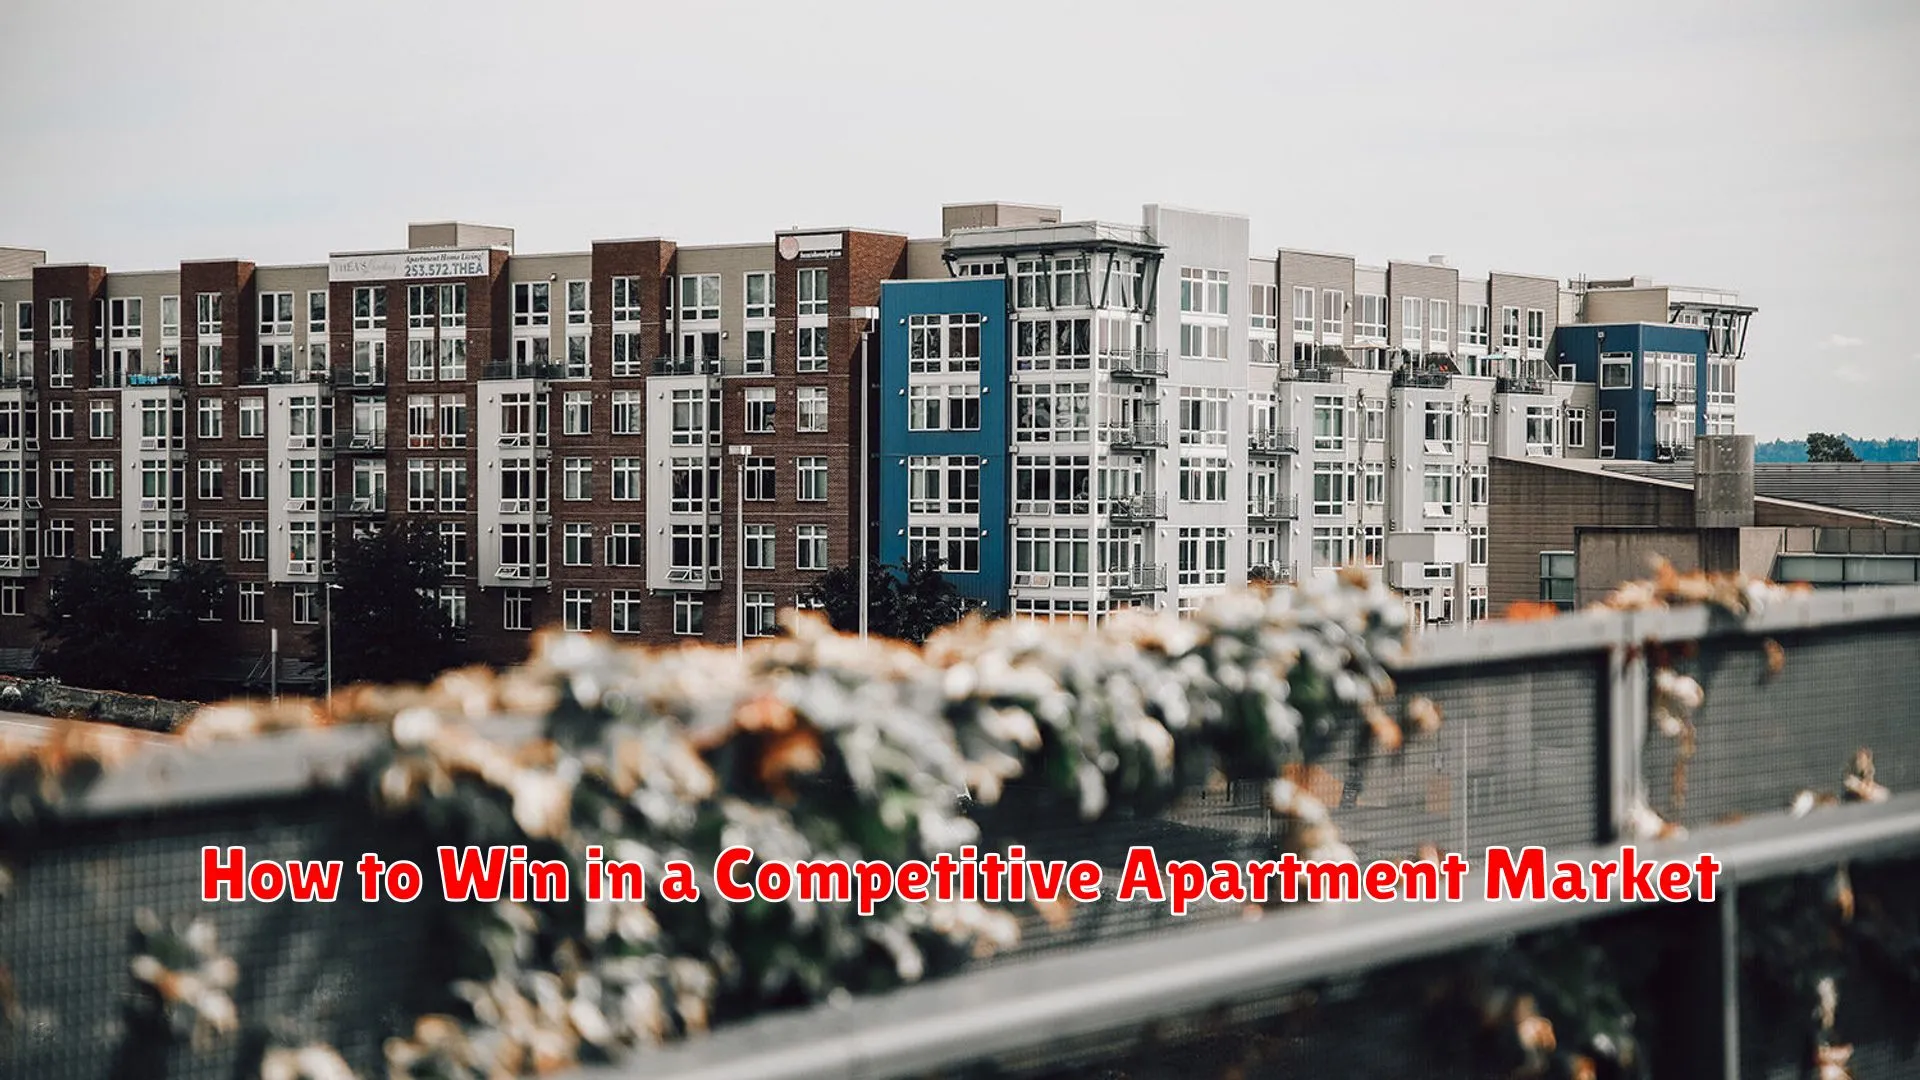 How to Win in a Competitive Apartment Market